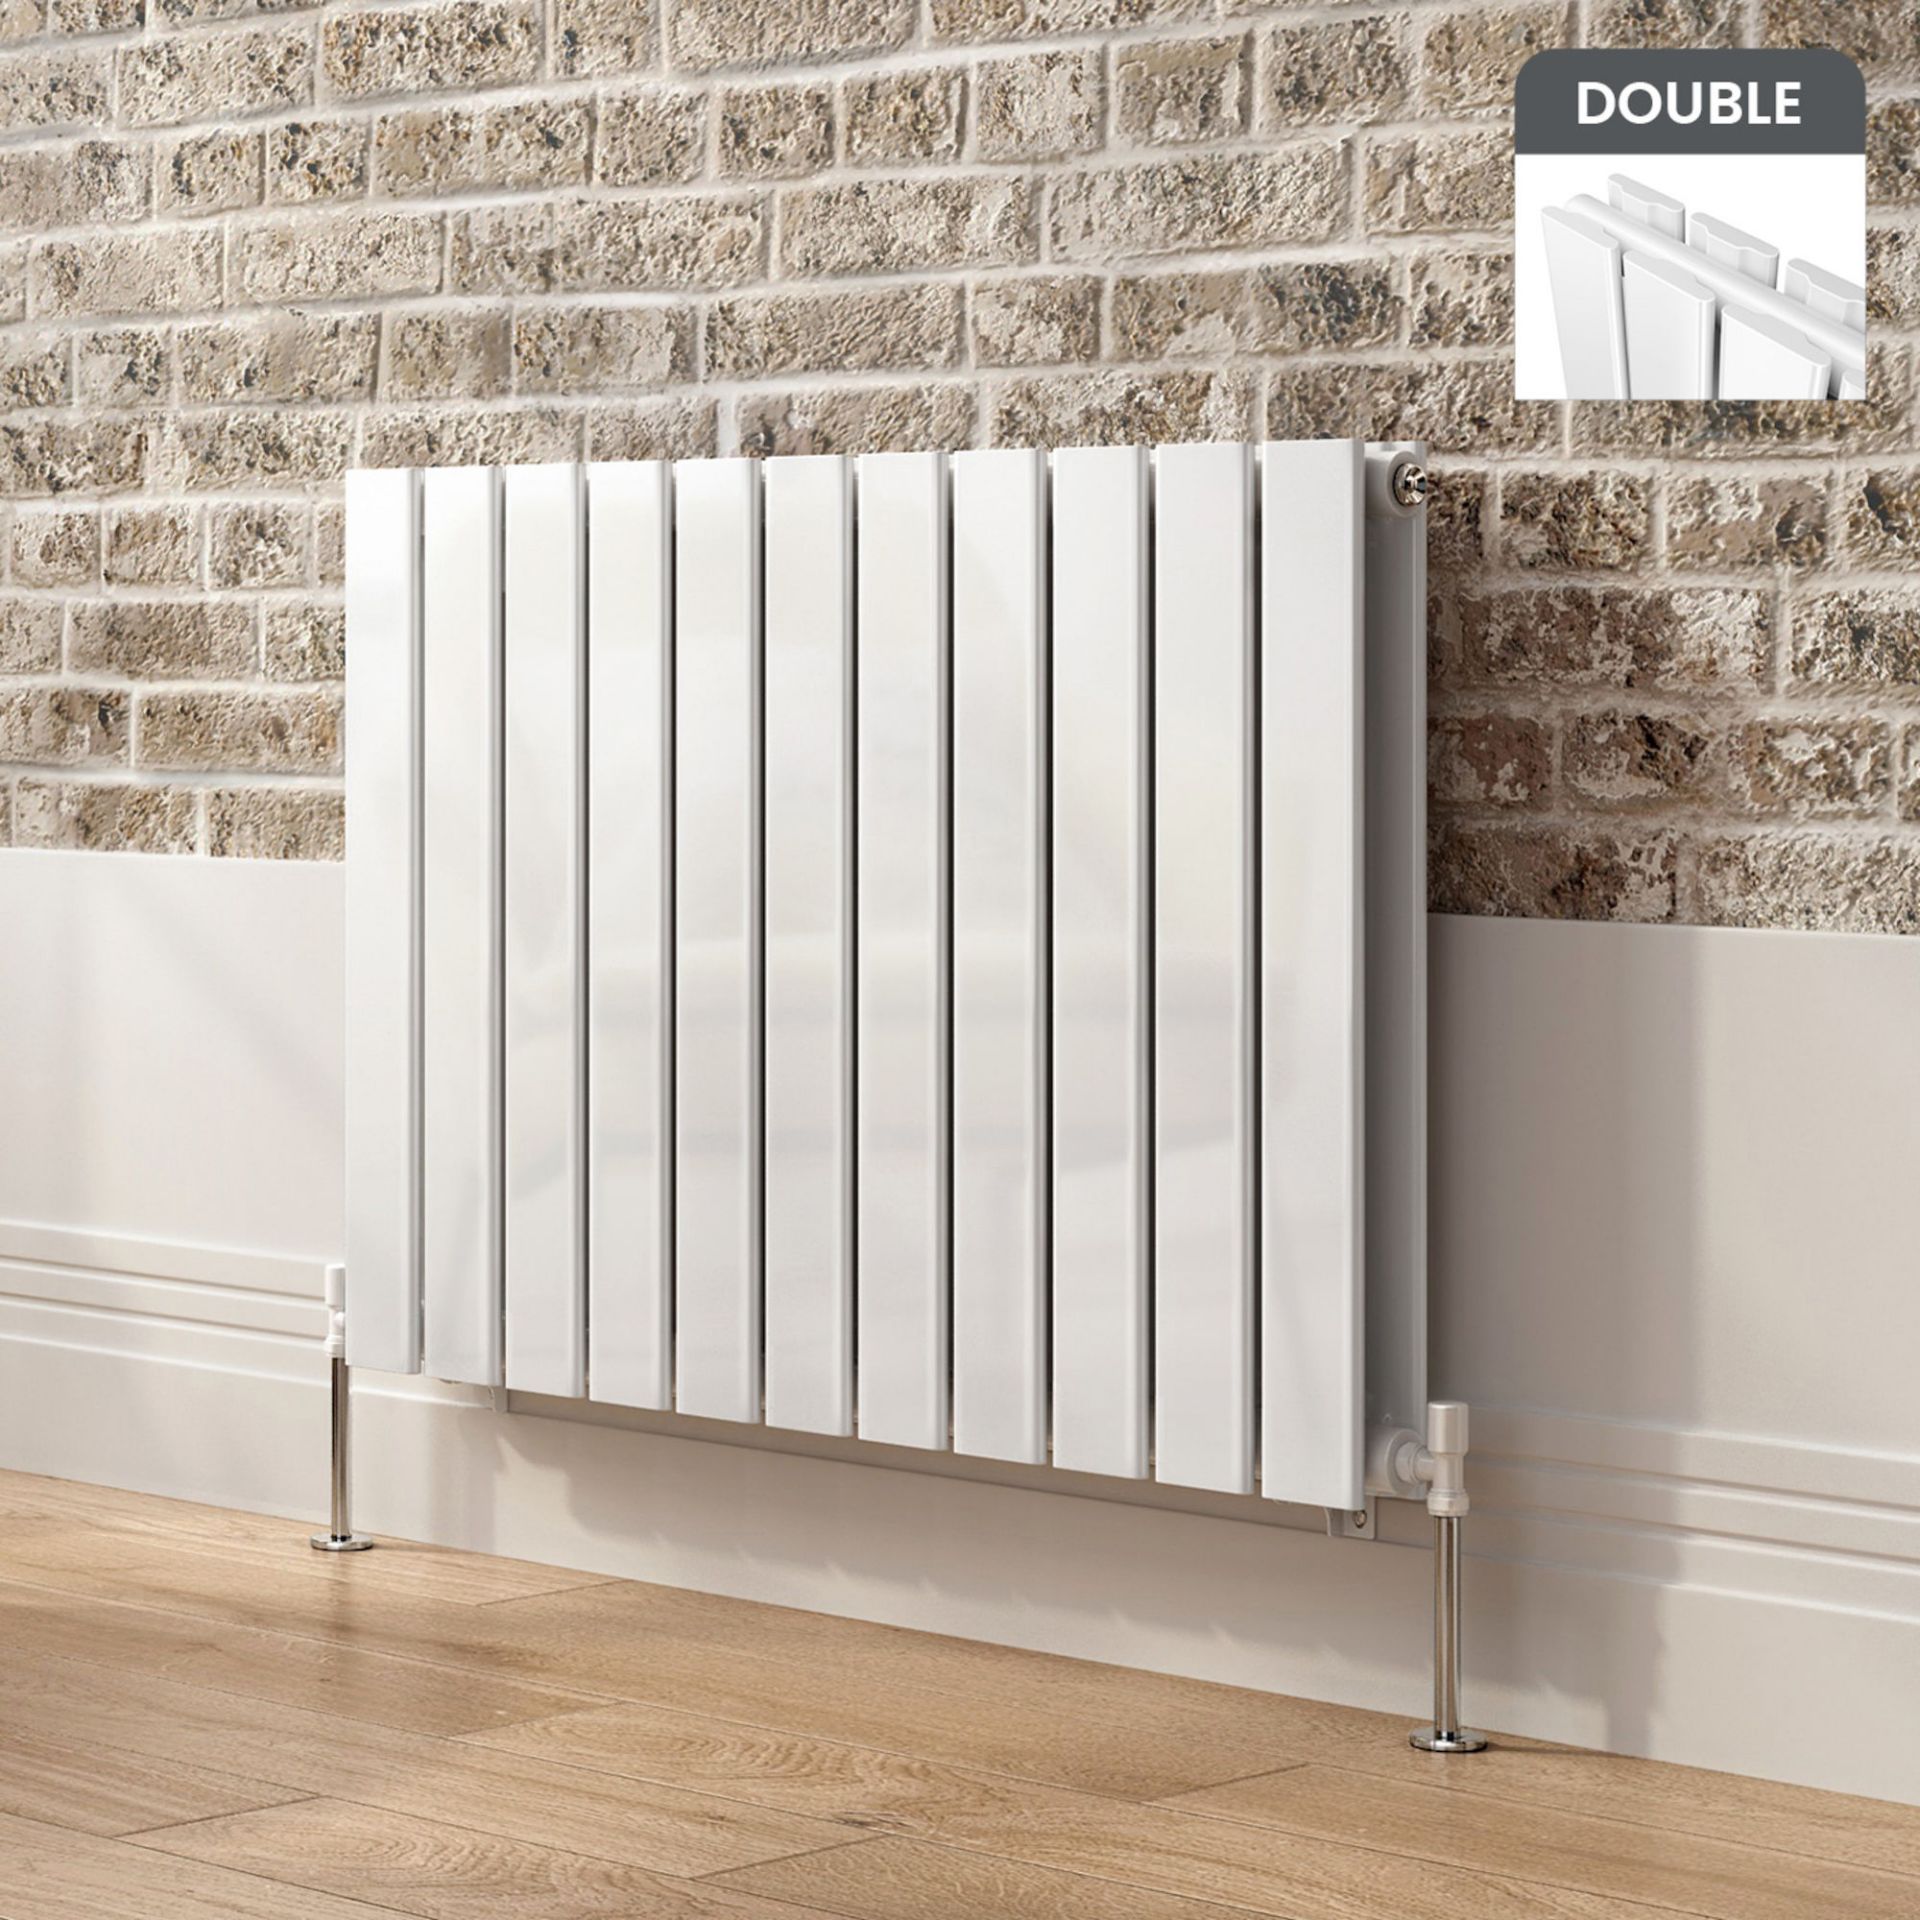 (KL45) 600x830mm Gloss White Double Flat Panel Horizontal Radiator. RRP £399.99. Made with high